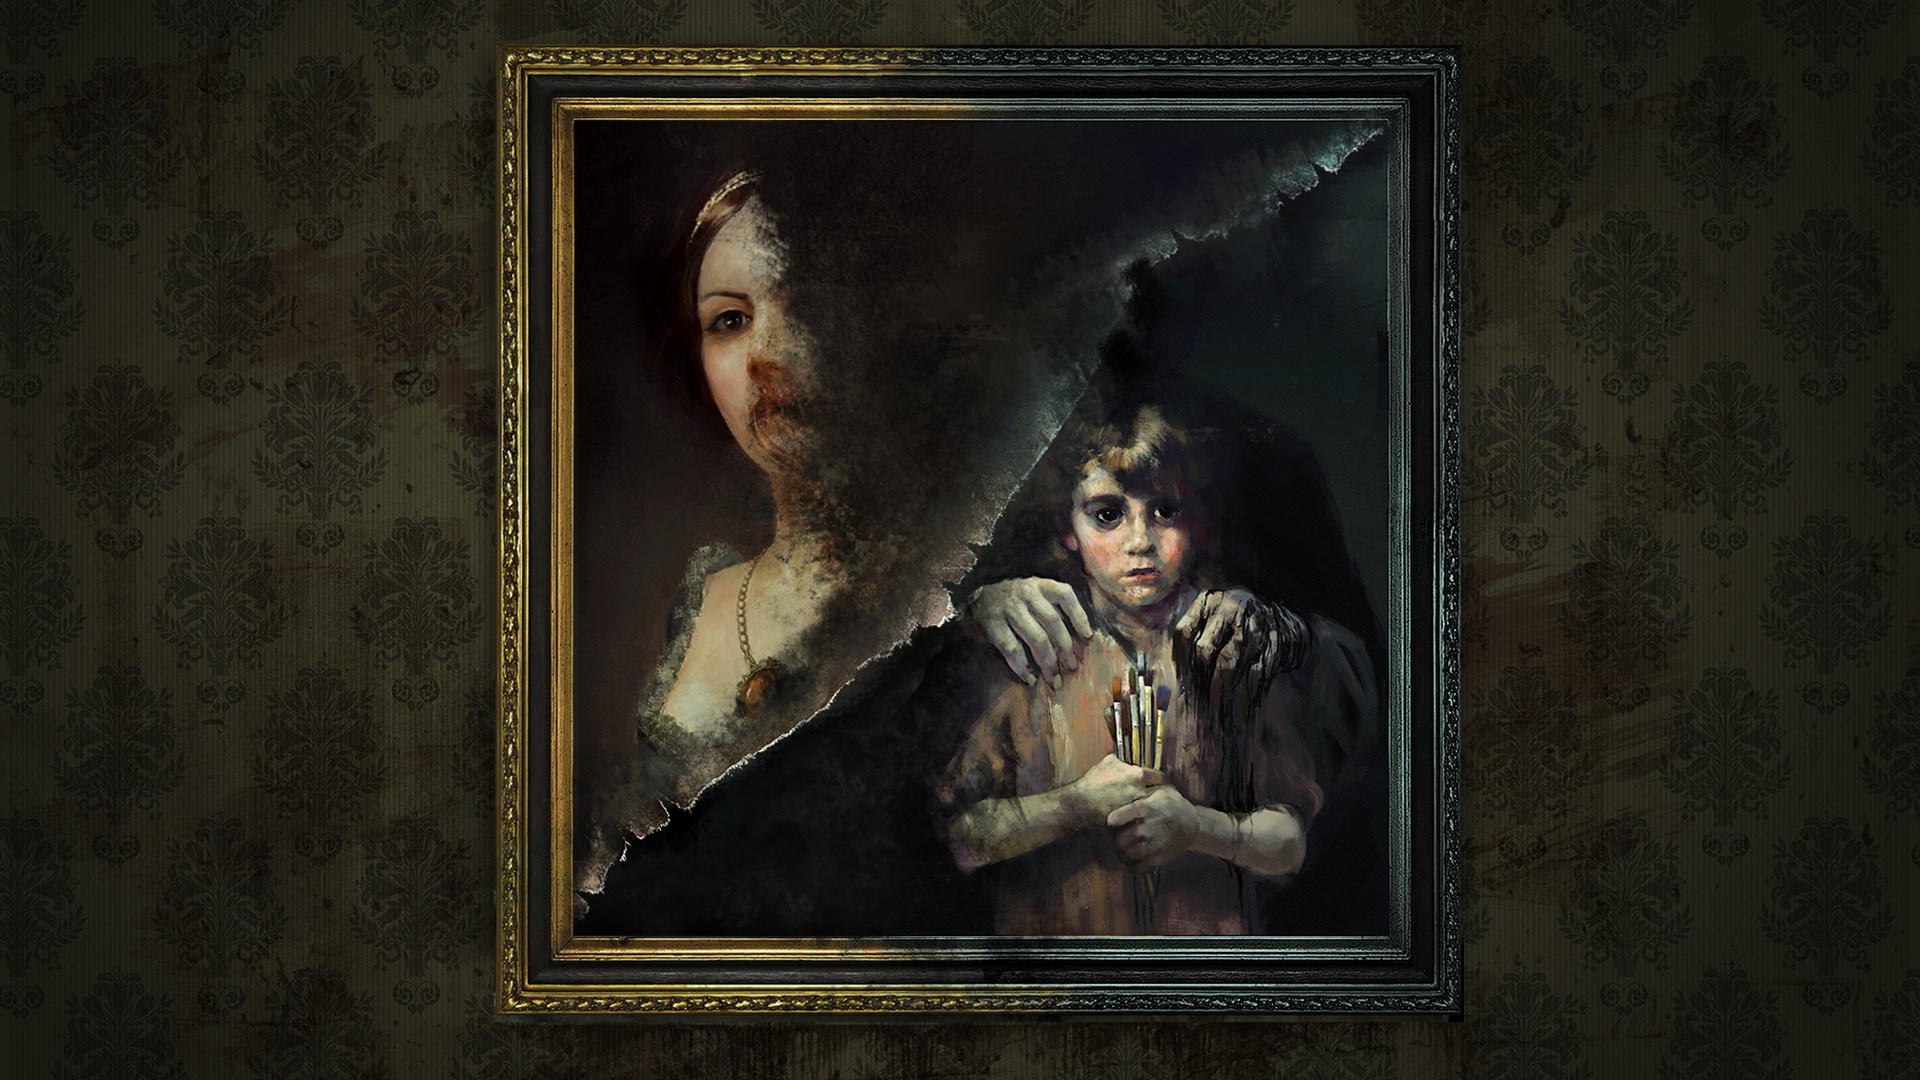 Layers Of Fear Story And Ending Explained 